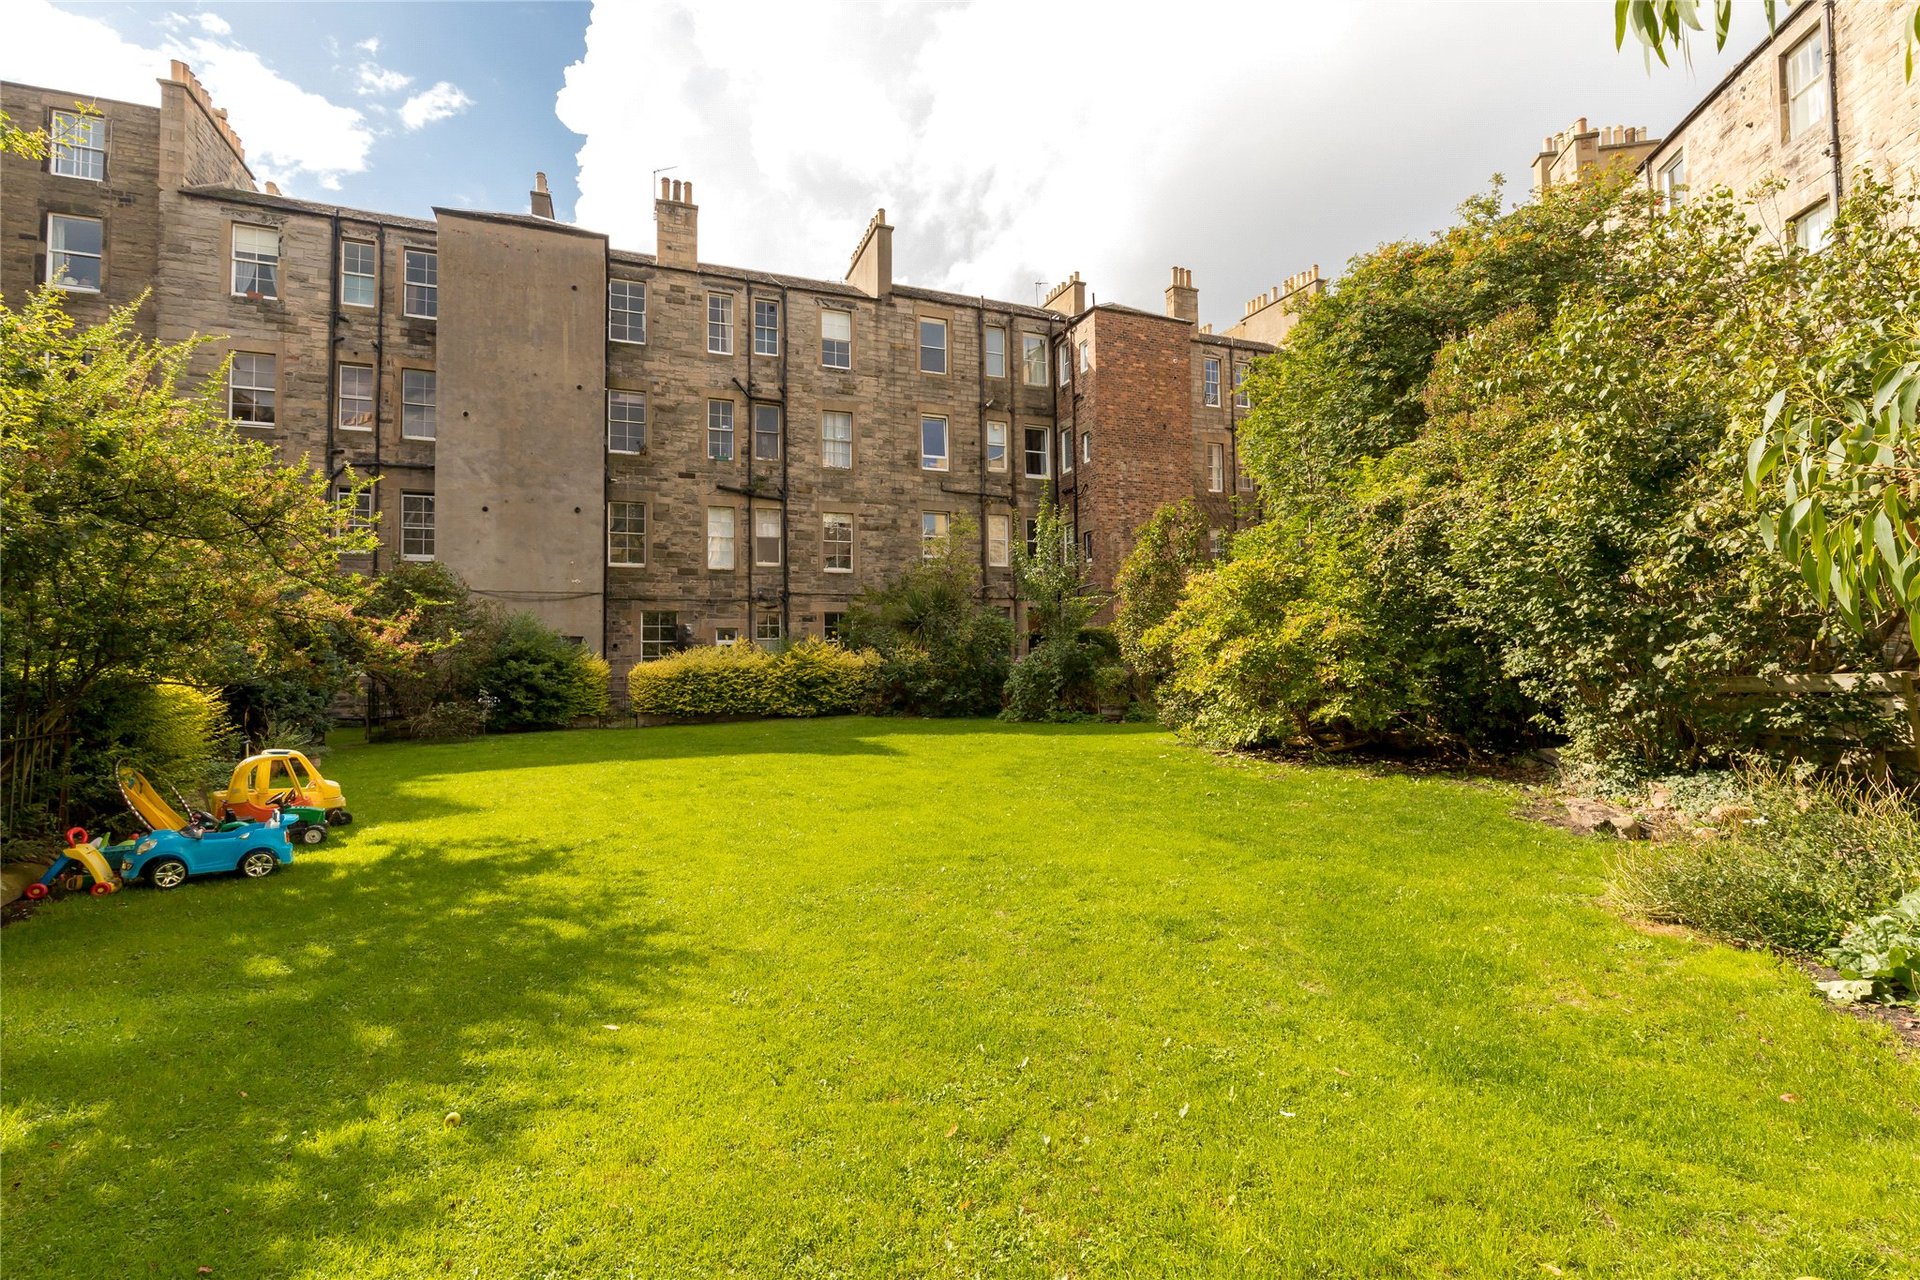 9(2f1), Bowhill Terrace, Edinburgh, EH3 5QY - Picture #14